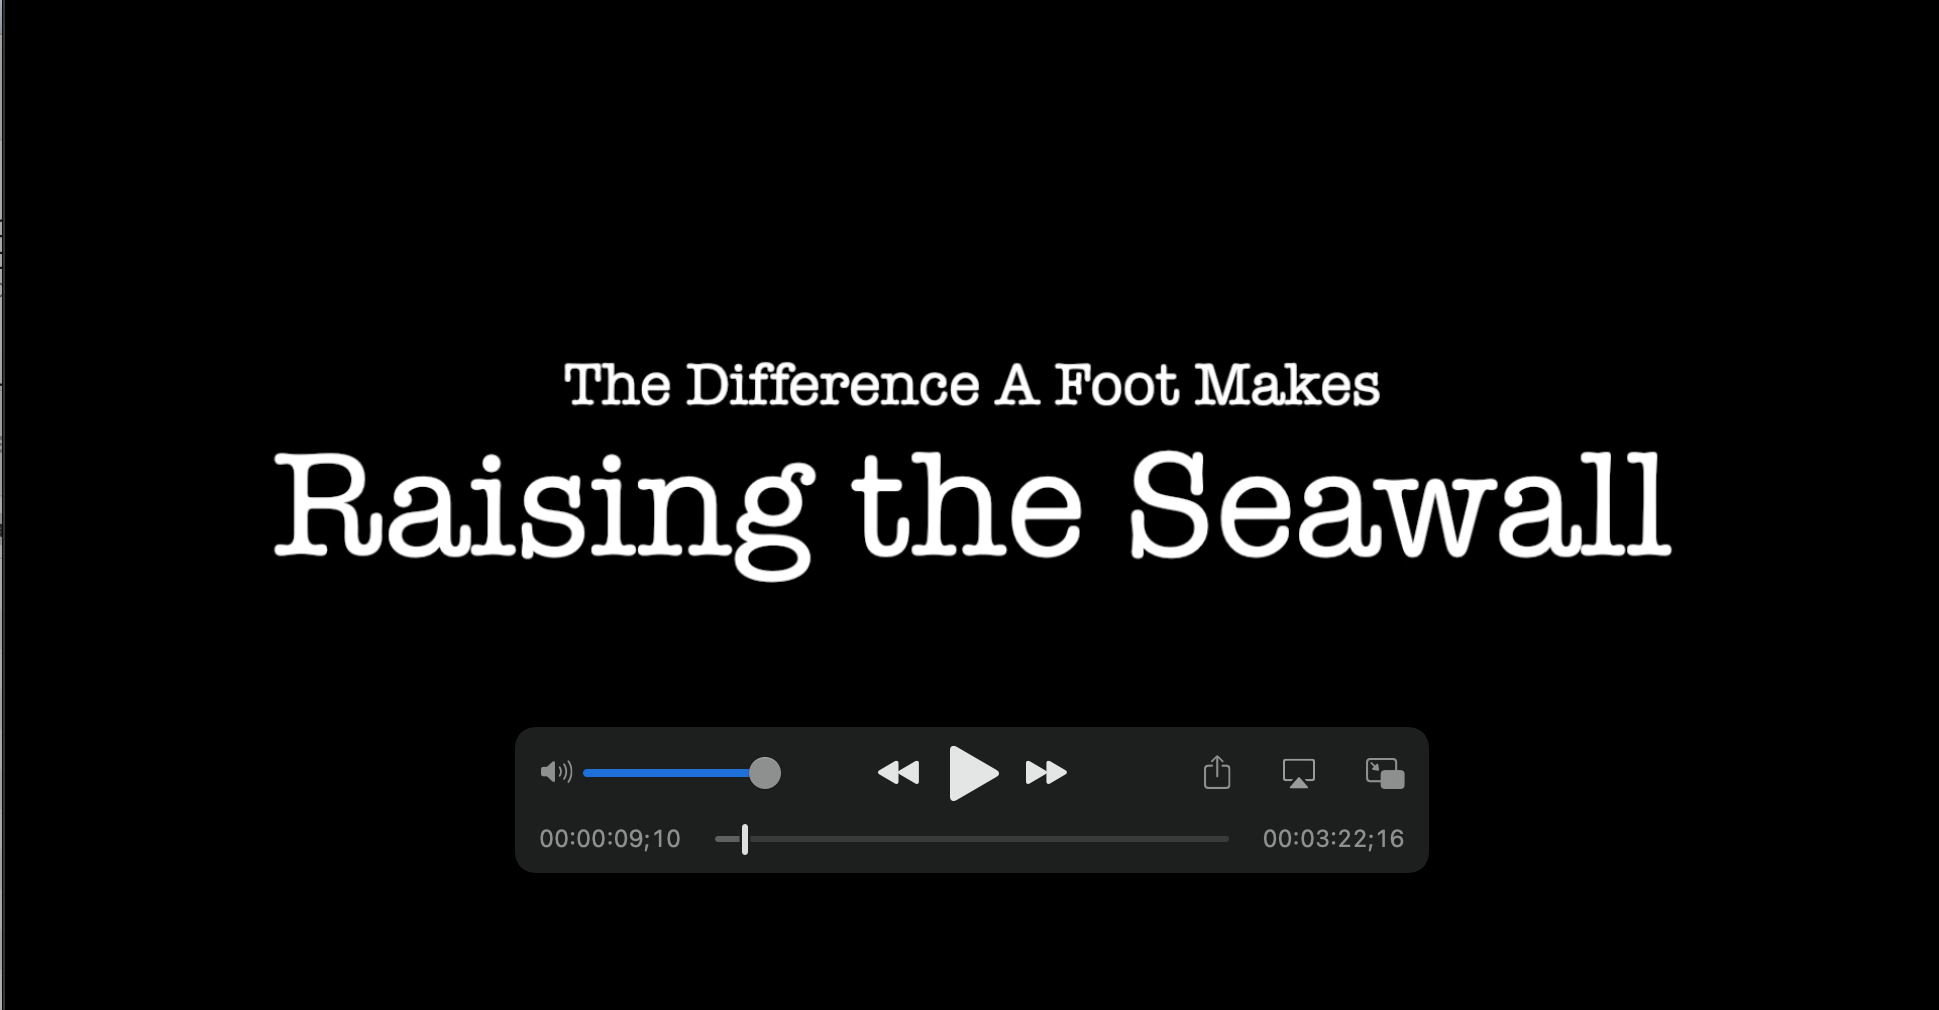 Watch the video: Raising the Seawall to see what raising the seawall 12 inches might look like.